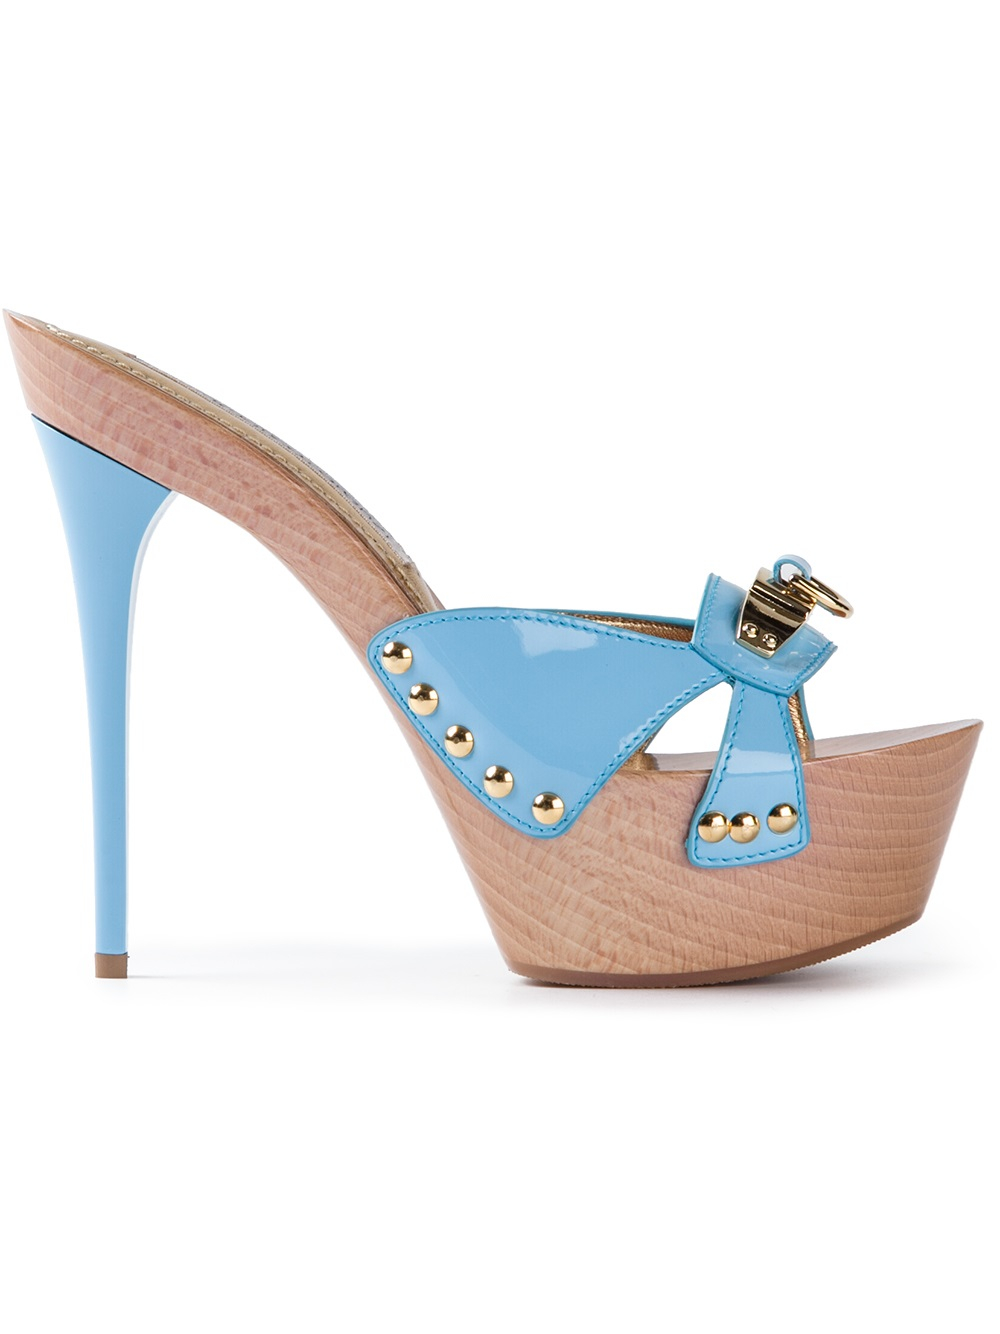 Gianmarco lorenzi Varnished Mules in Blue | Lyst